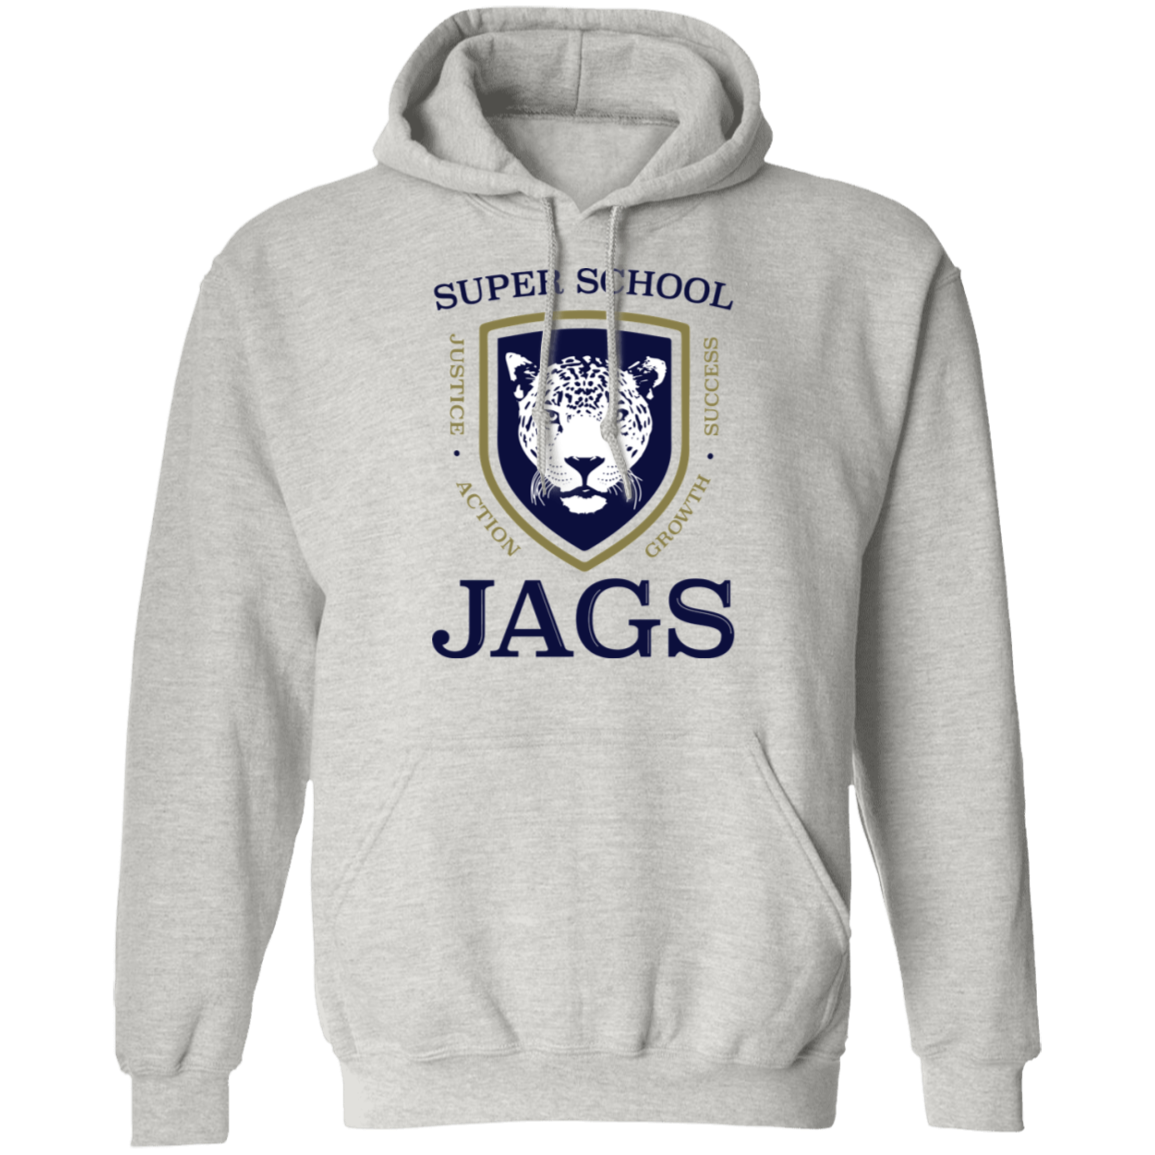 Pullover Hoodie Youth & Adult - Super School